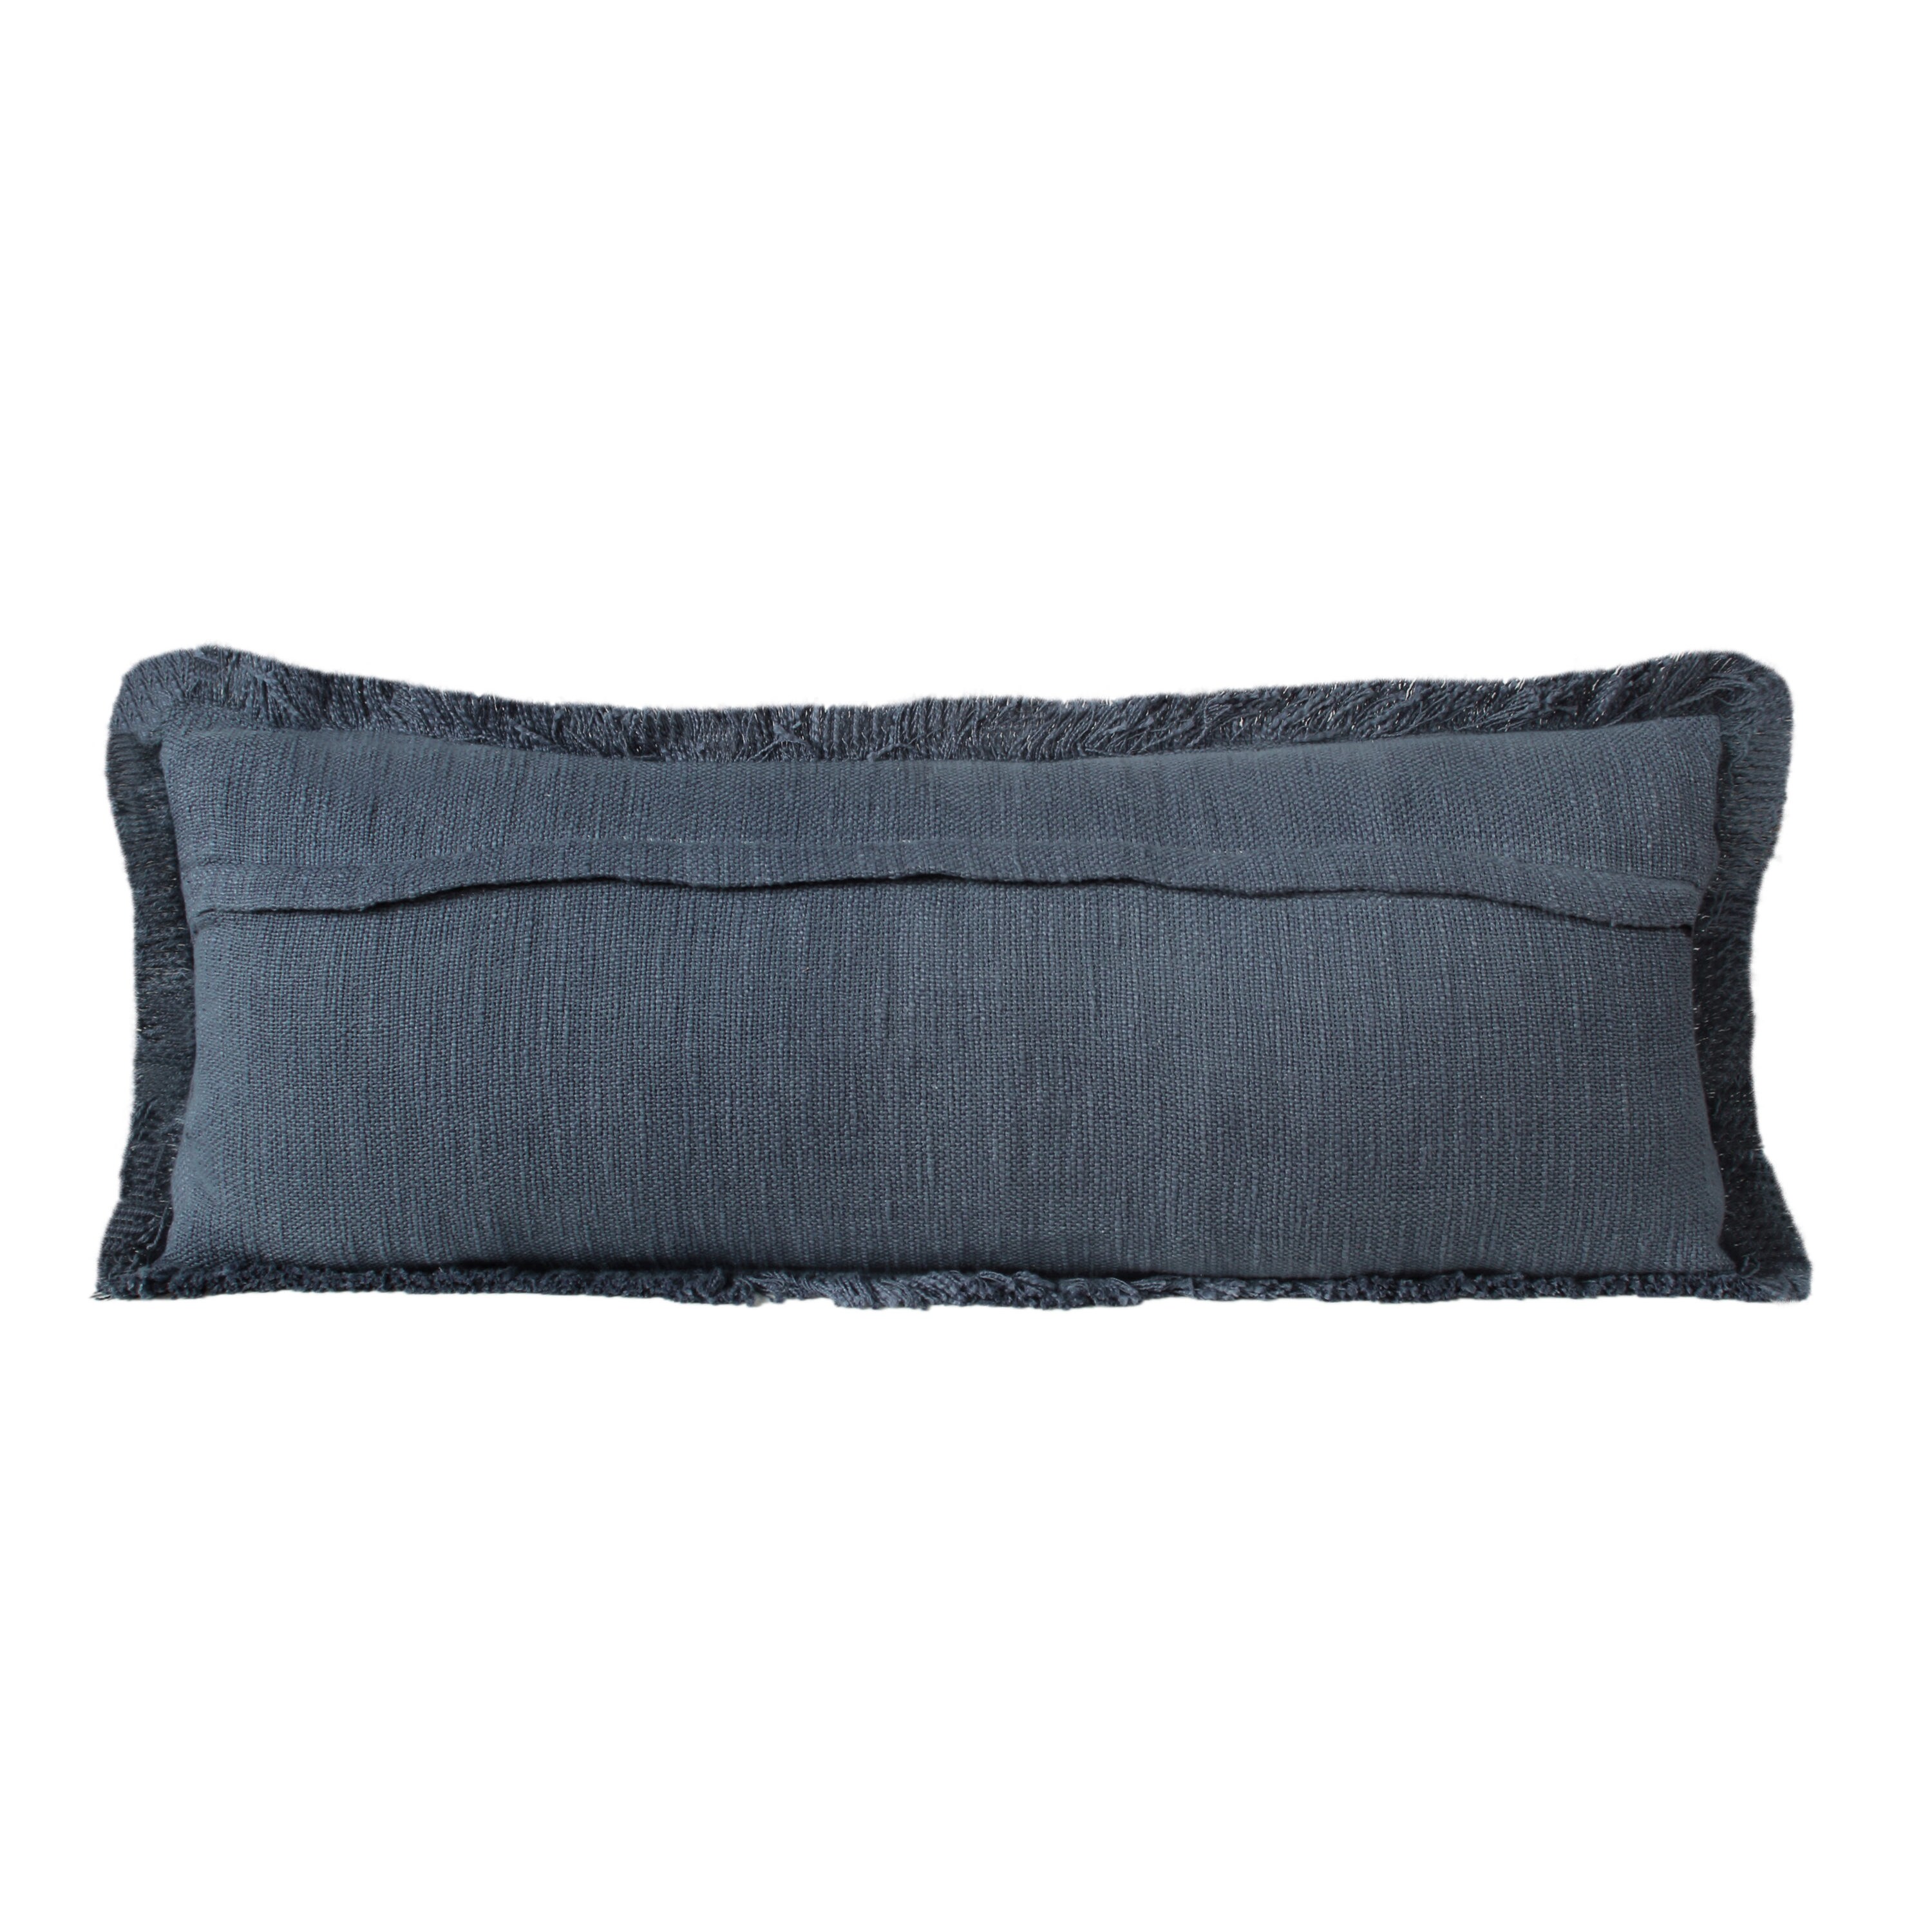 Serenity - Square and Horizontal Decorative Throw Pillow